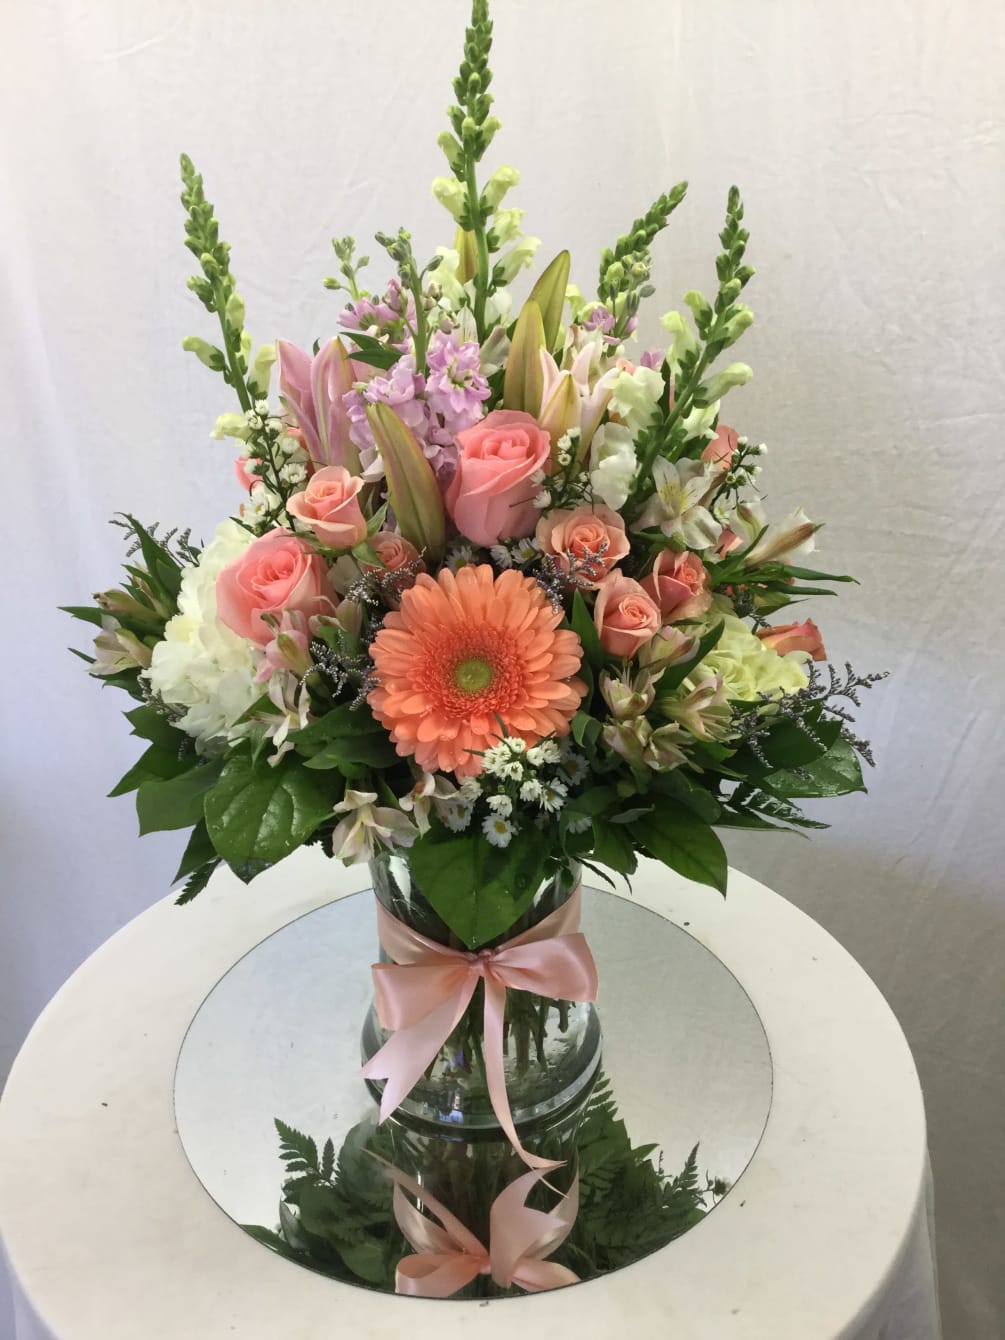 This stunning bouquet is a perfect gift for every special occasion. Includes